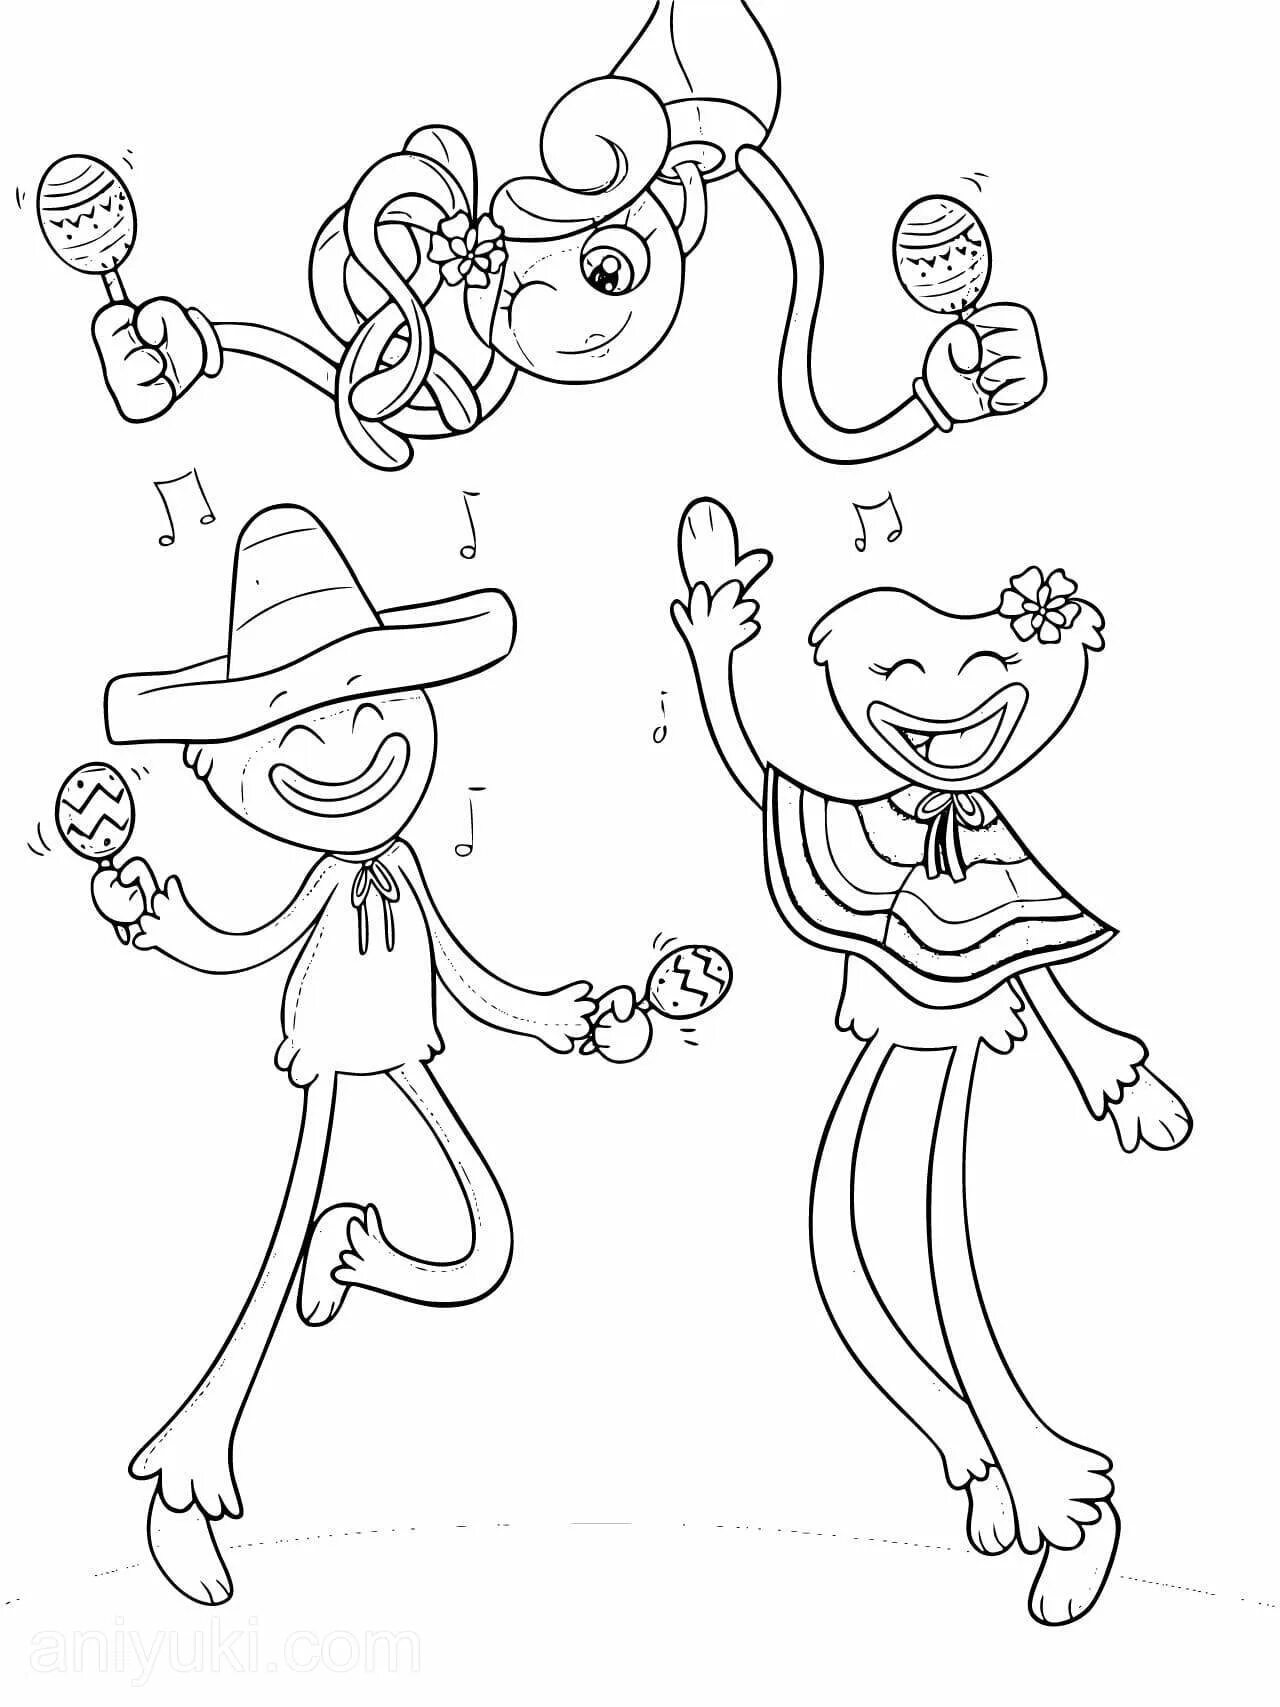 Fun pippi play time coloring page